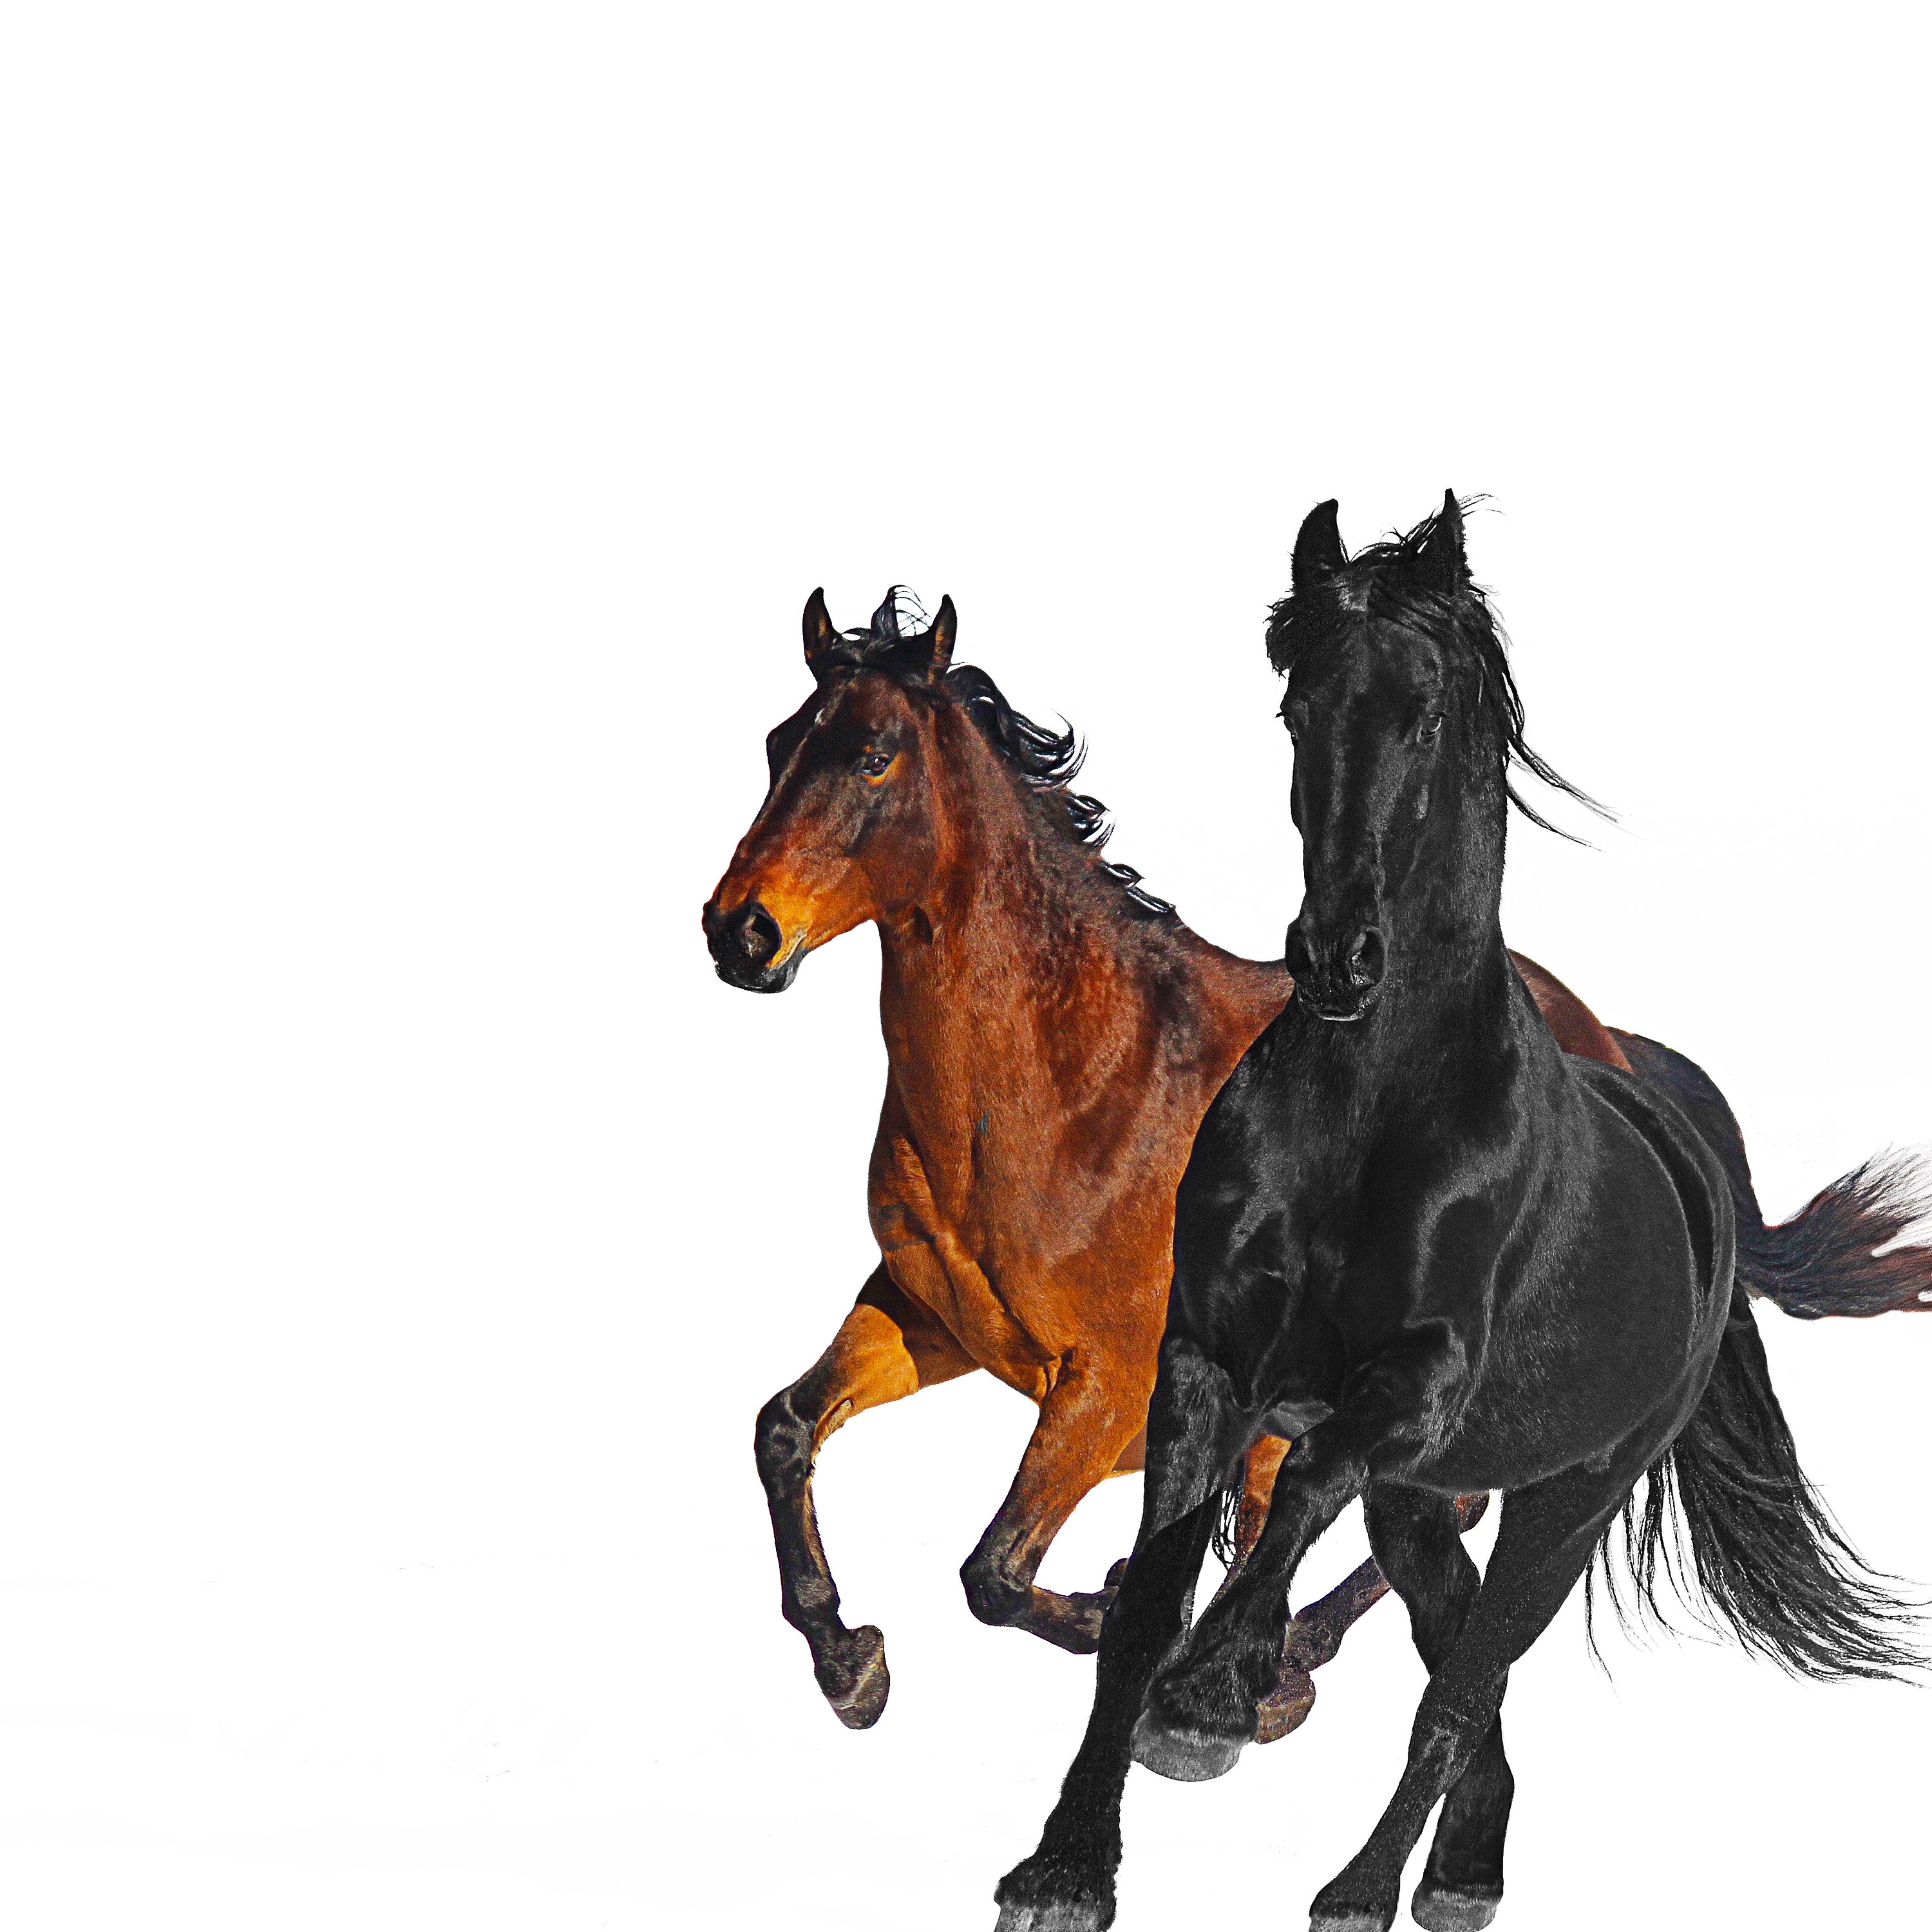 Old town road horses